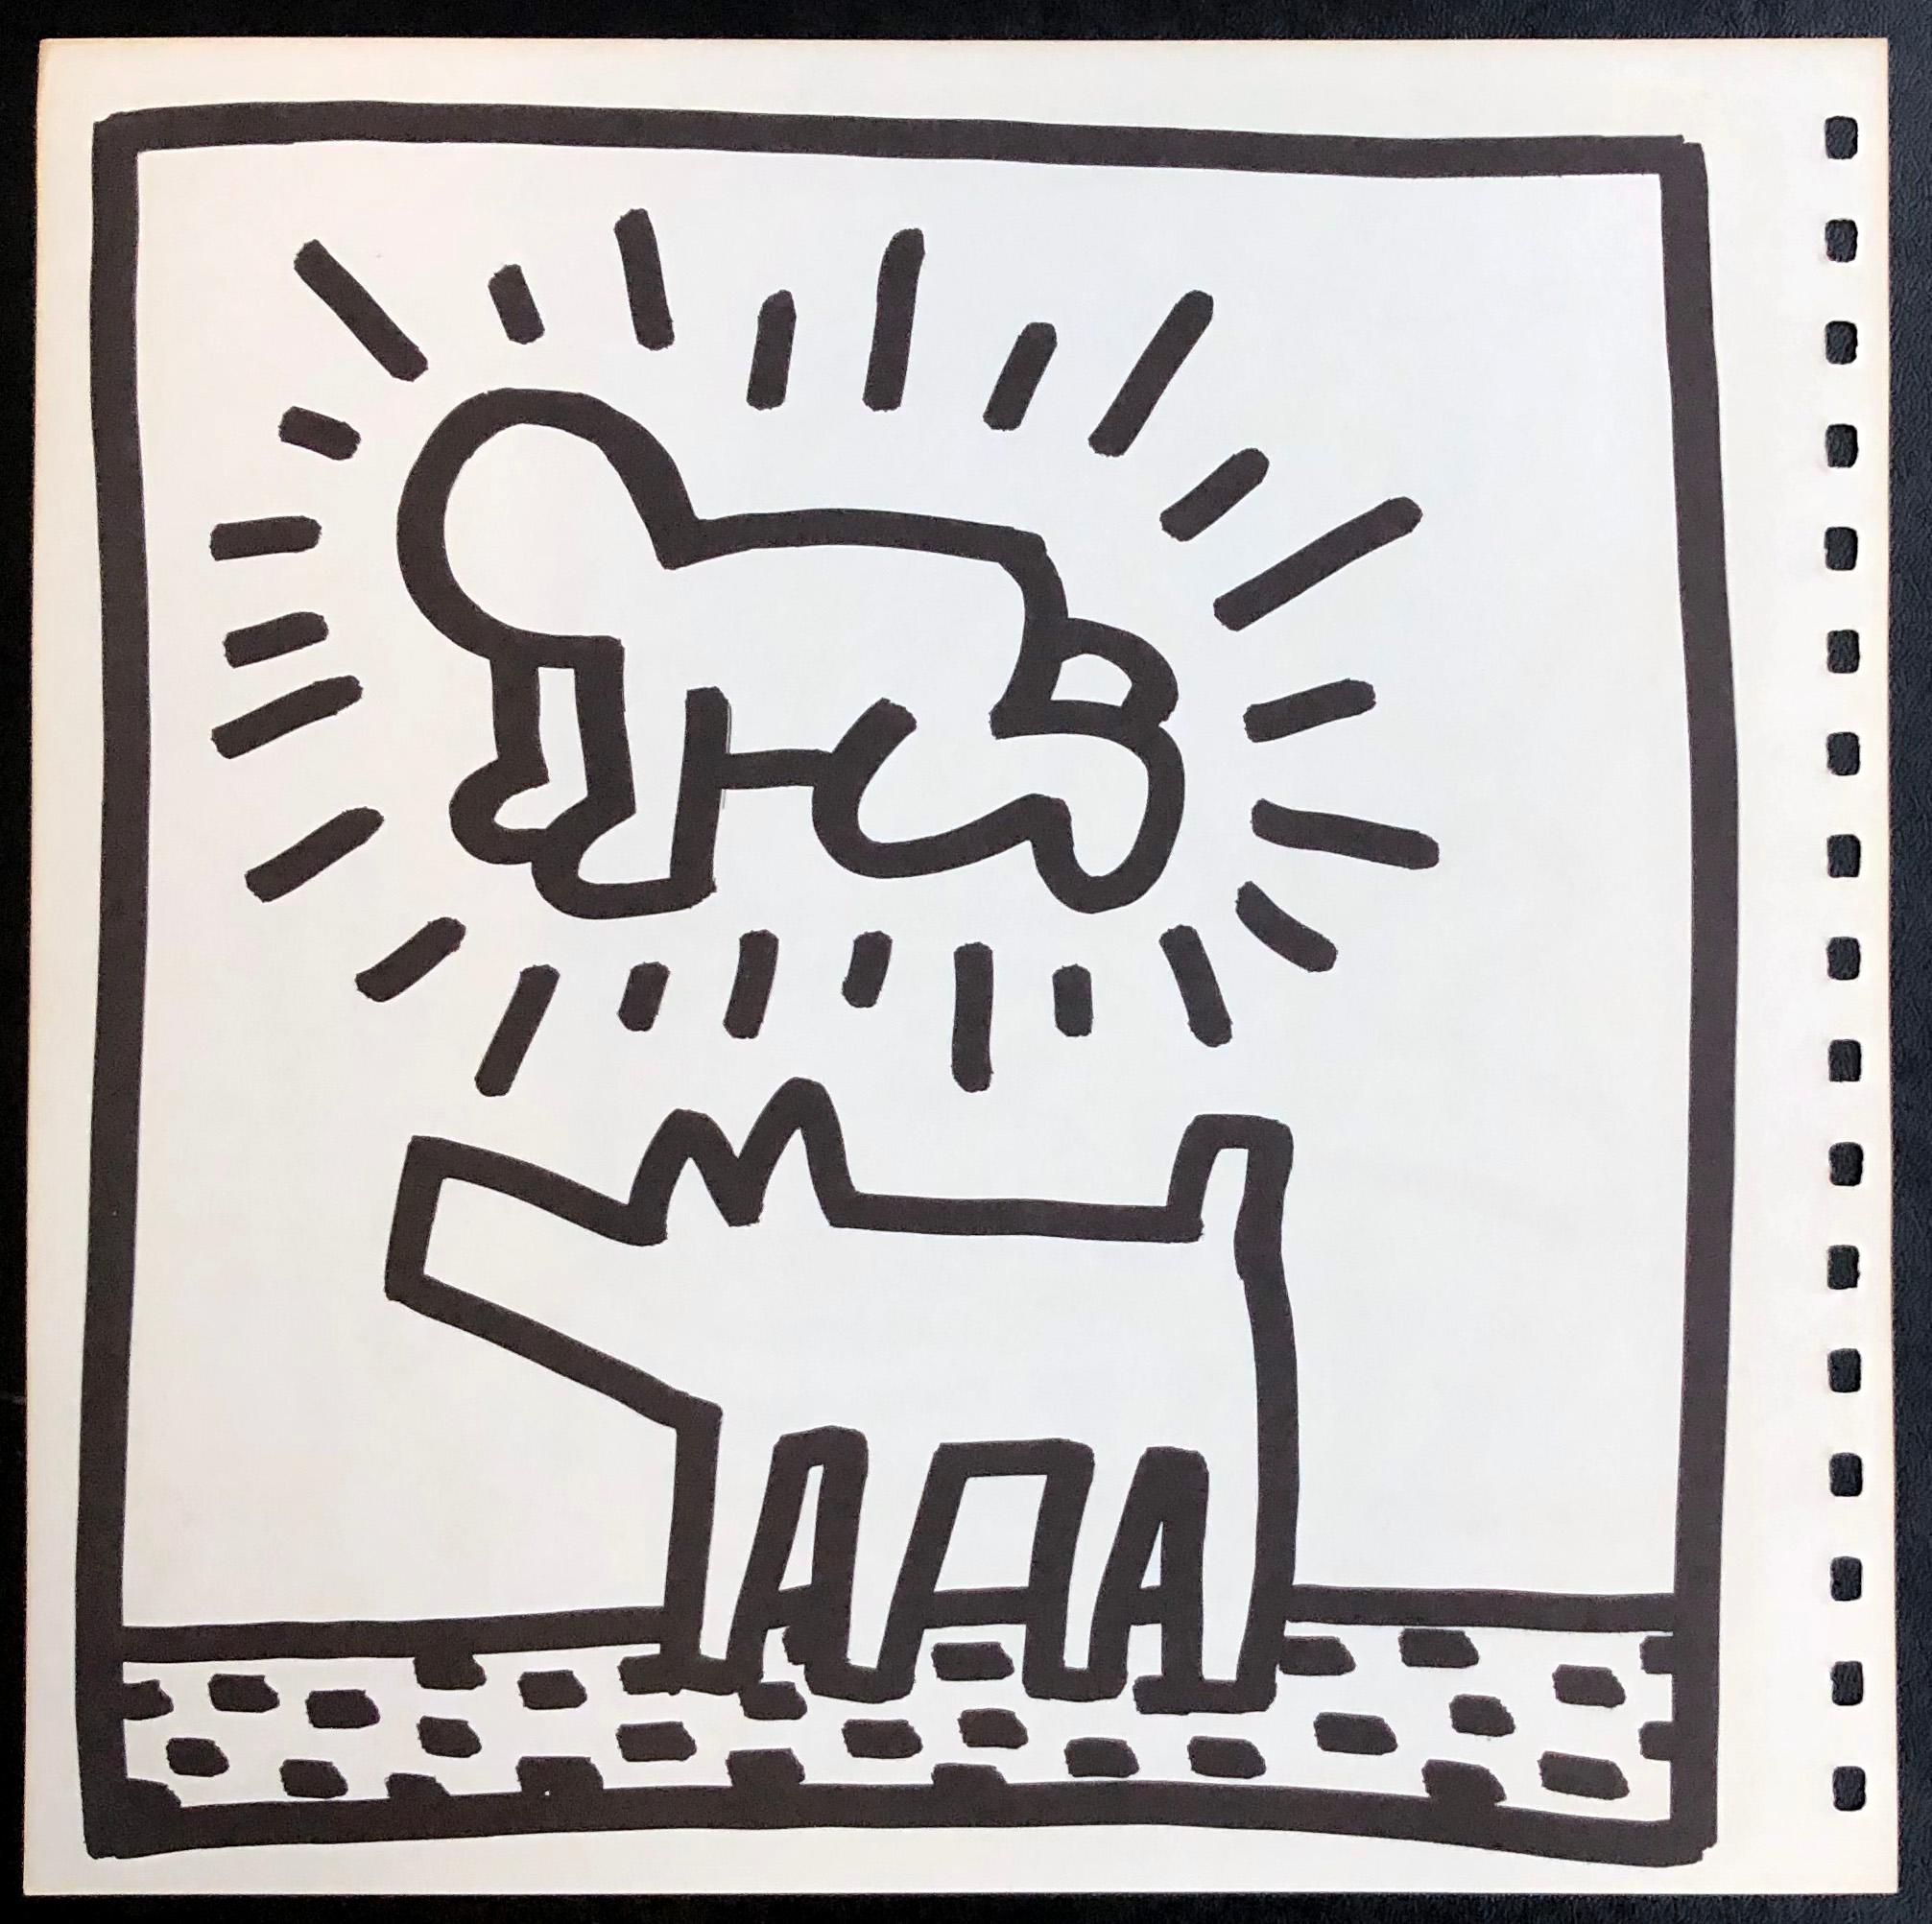 Keith Haring lithograph 1982 (Keith Haring Tony Shafrazi gallery) - Print by (after) Keith Haring